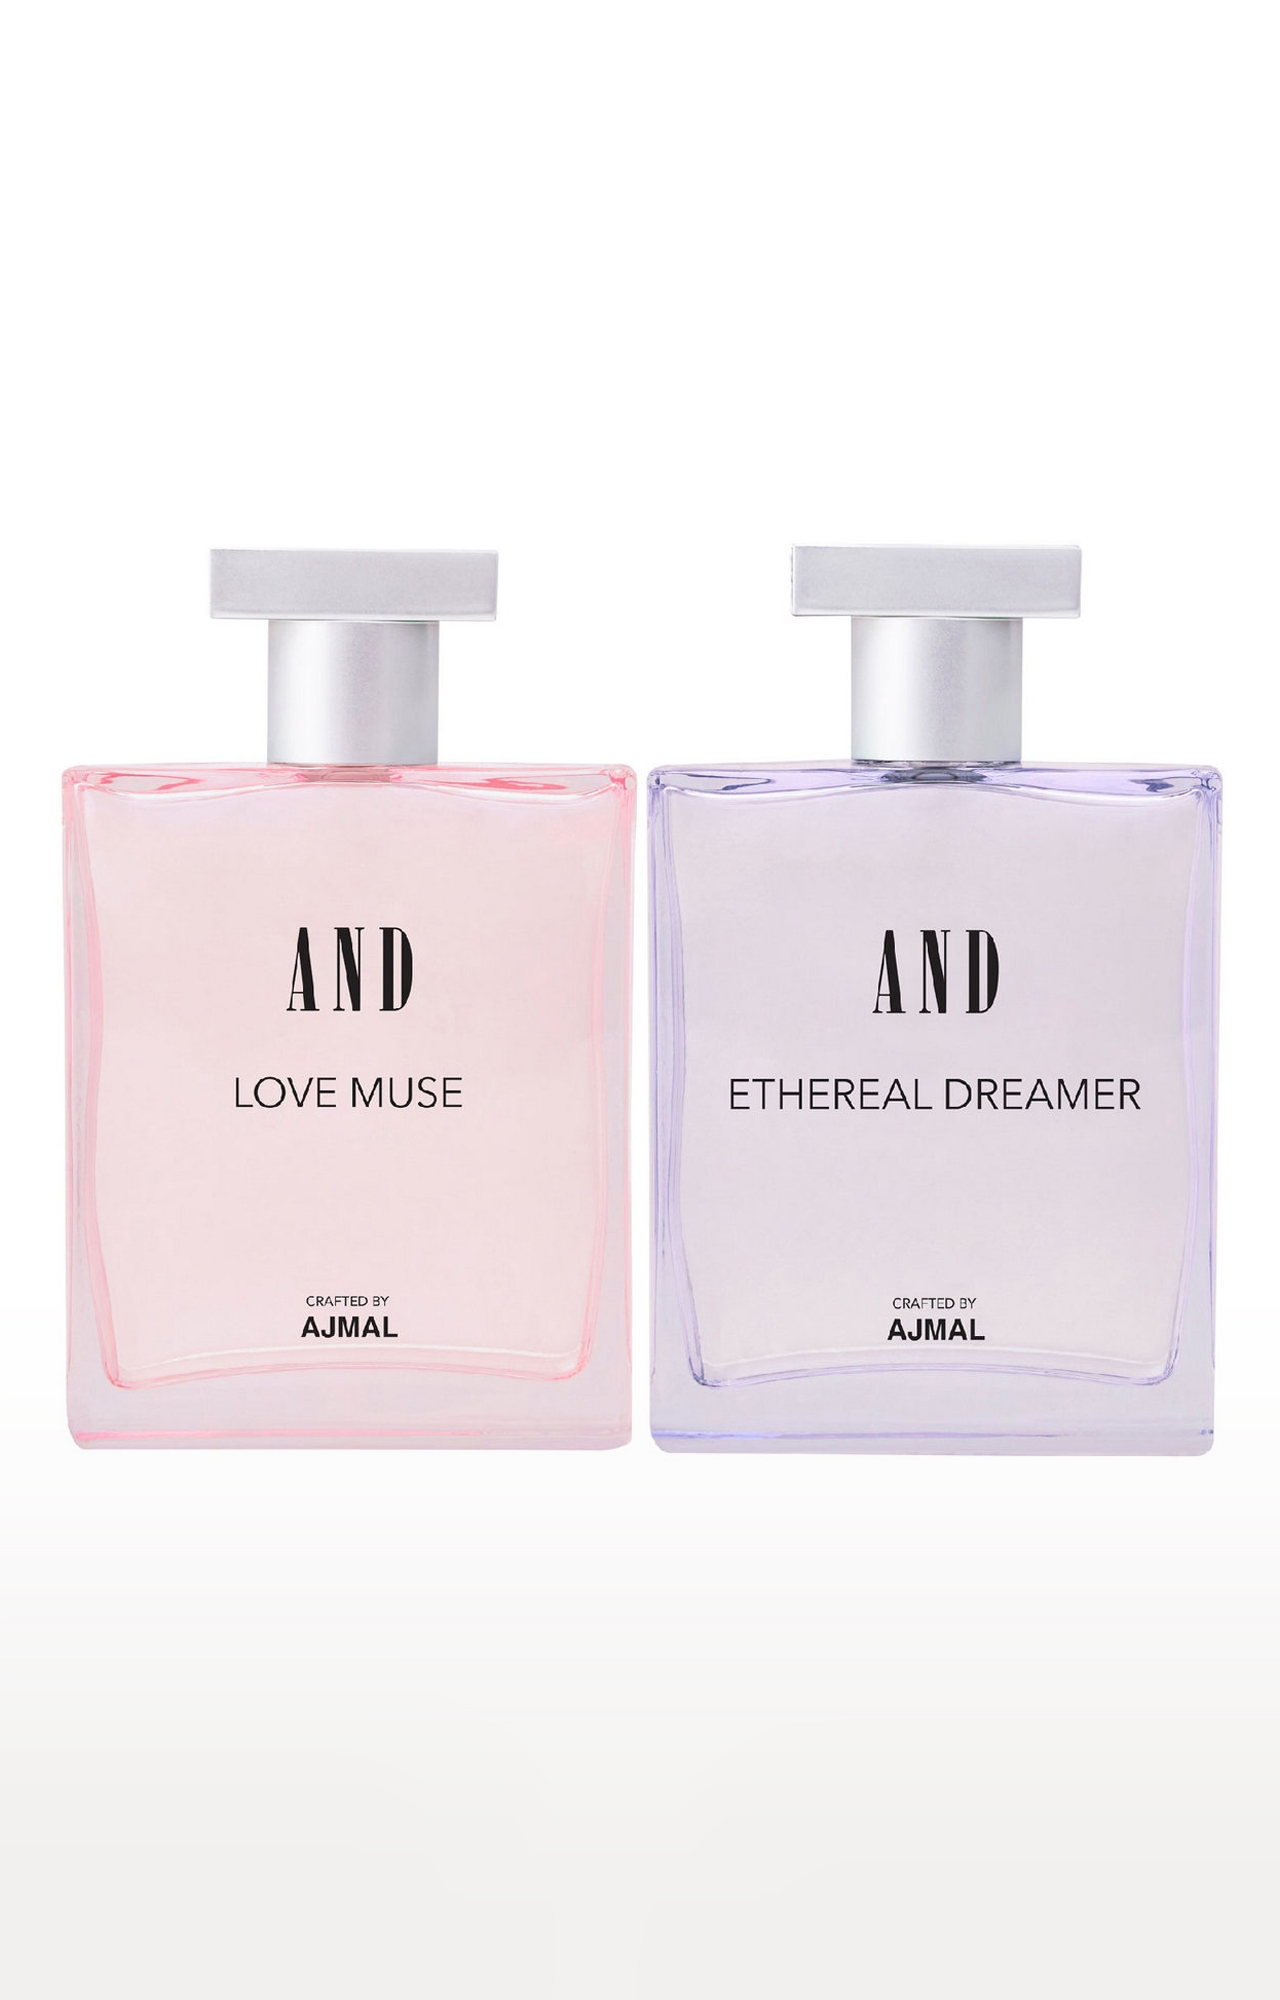 AND Love Muse & Ethereal Dreamer Pack of 2 Eau De Parfum 50ML each for Women Crafted by Ajmal 